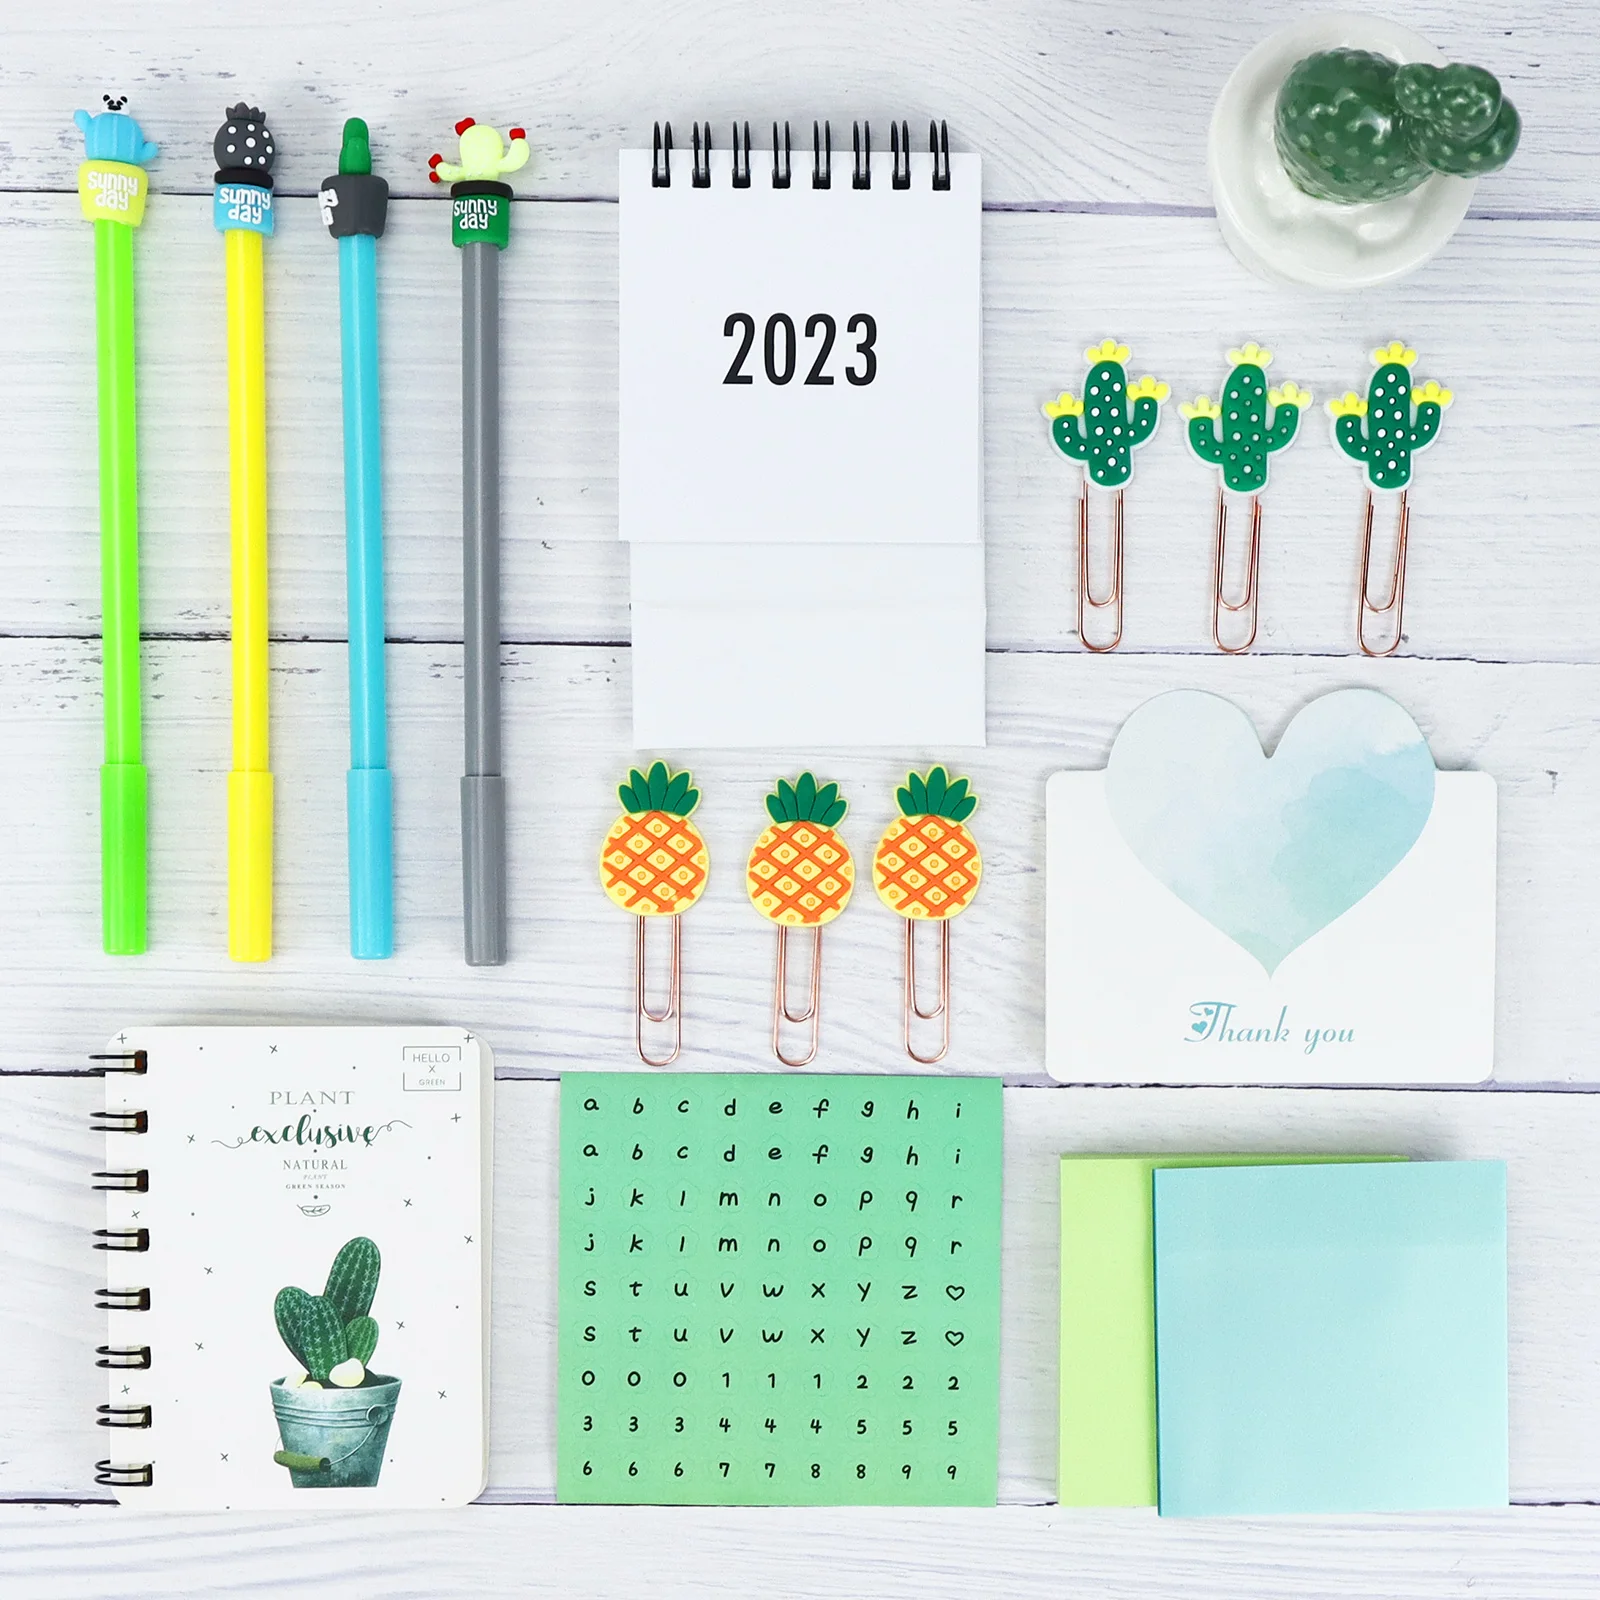 Plant Stationery Set Contains Gel Pens Paper Clips Sticky Notes Multi-Purpose School Office Supplies Combination